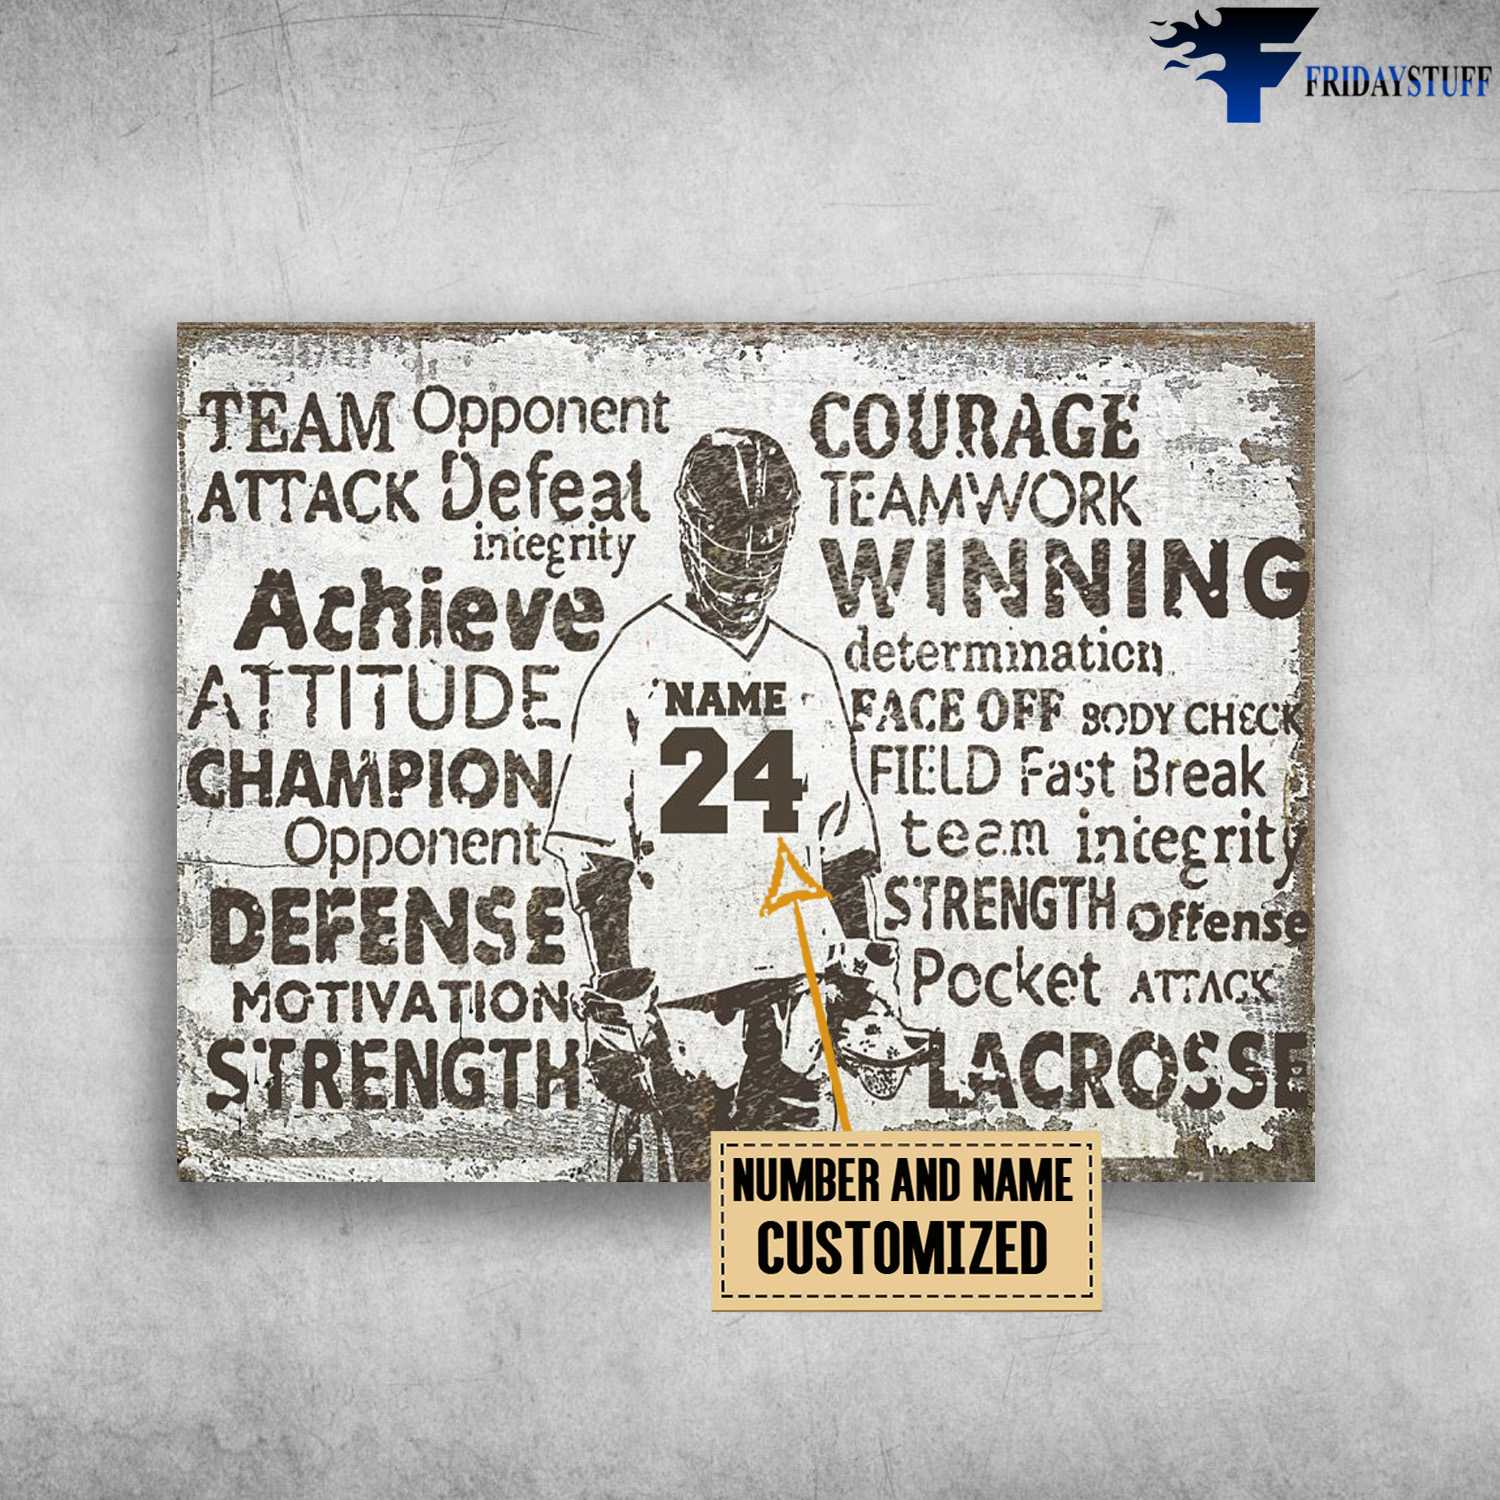 Lacrosse Poster, Lacrosse Player, Team, Opponent, Attack, Defeat, Incegrity, Achiece, Attitude, Champion, Courage